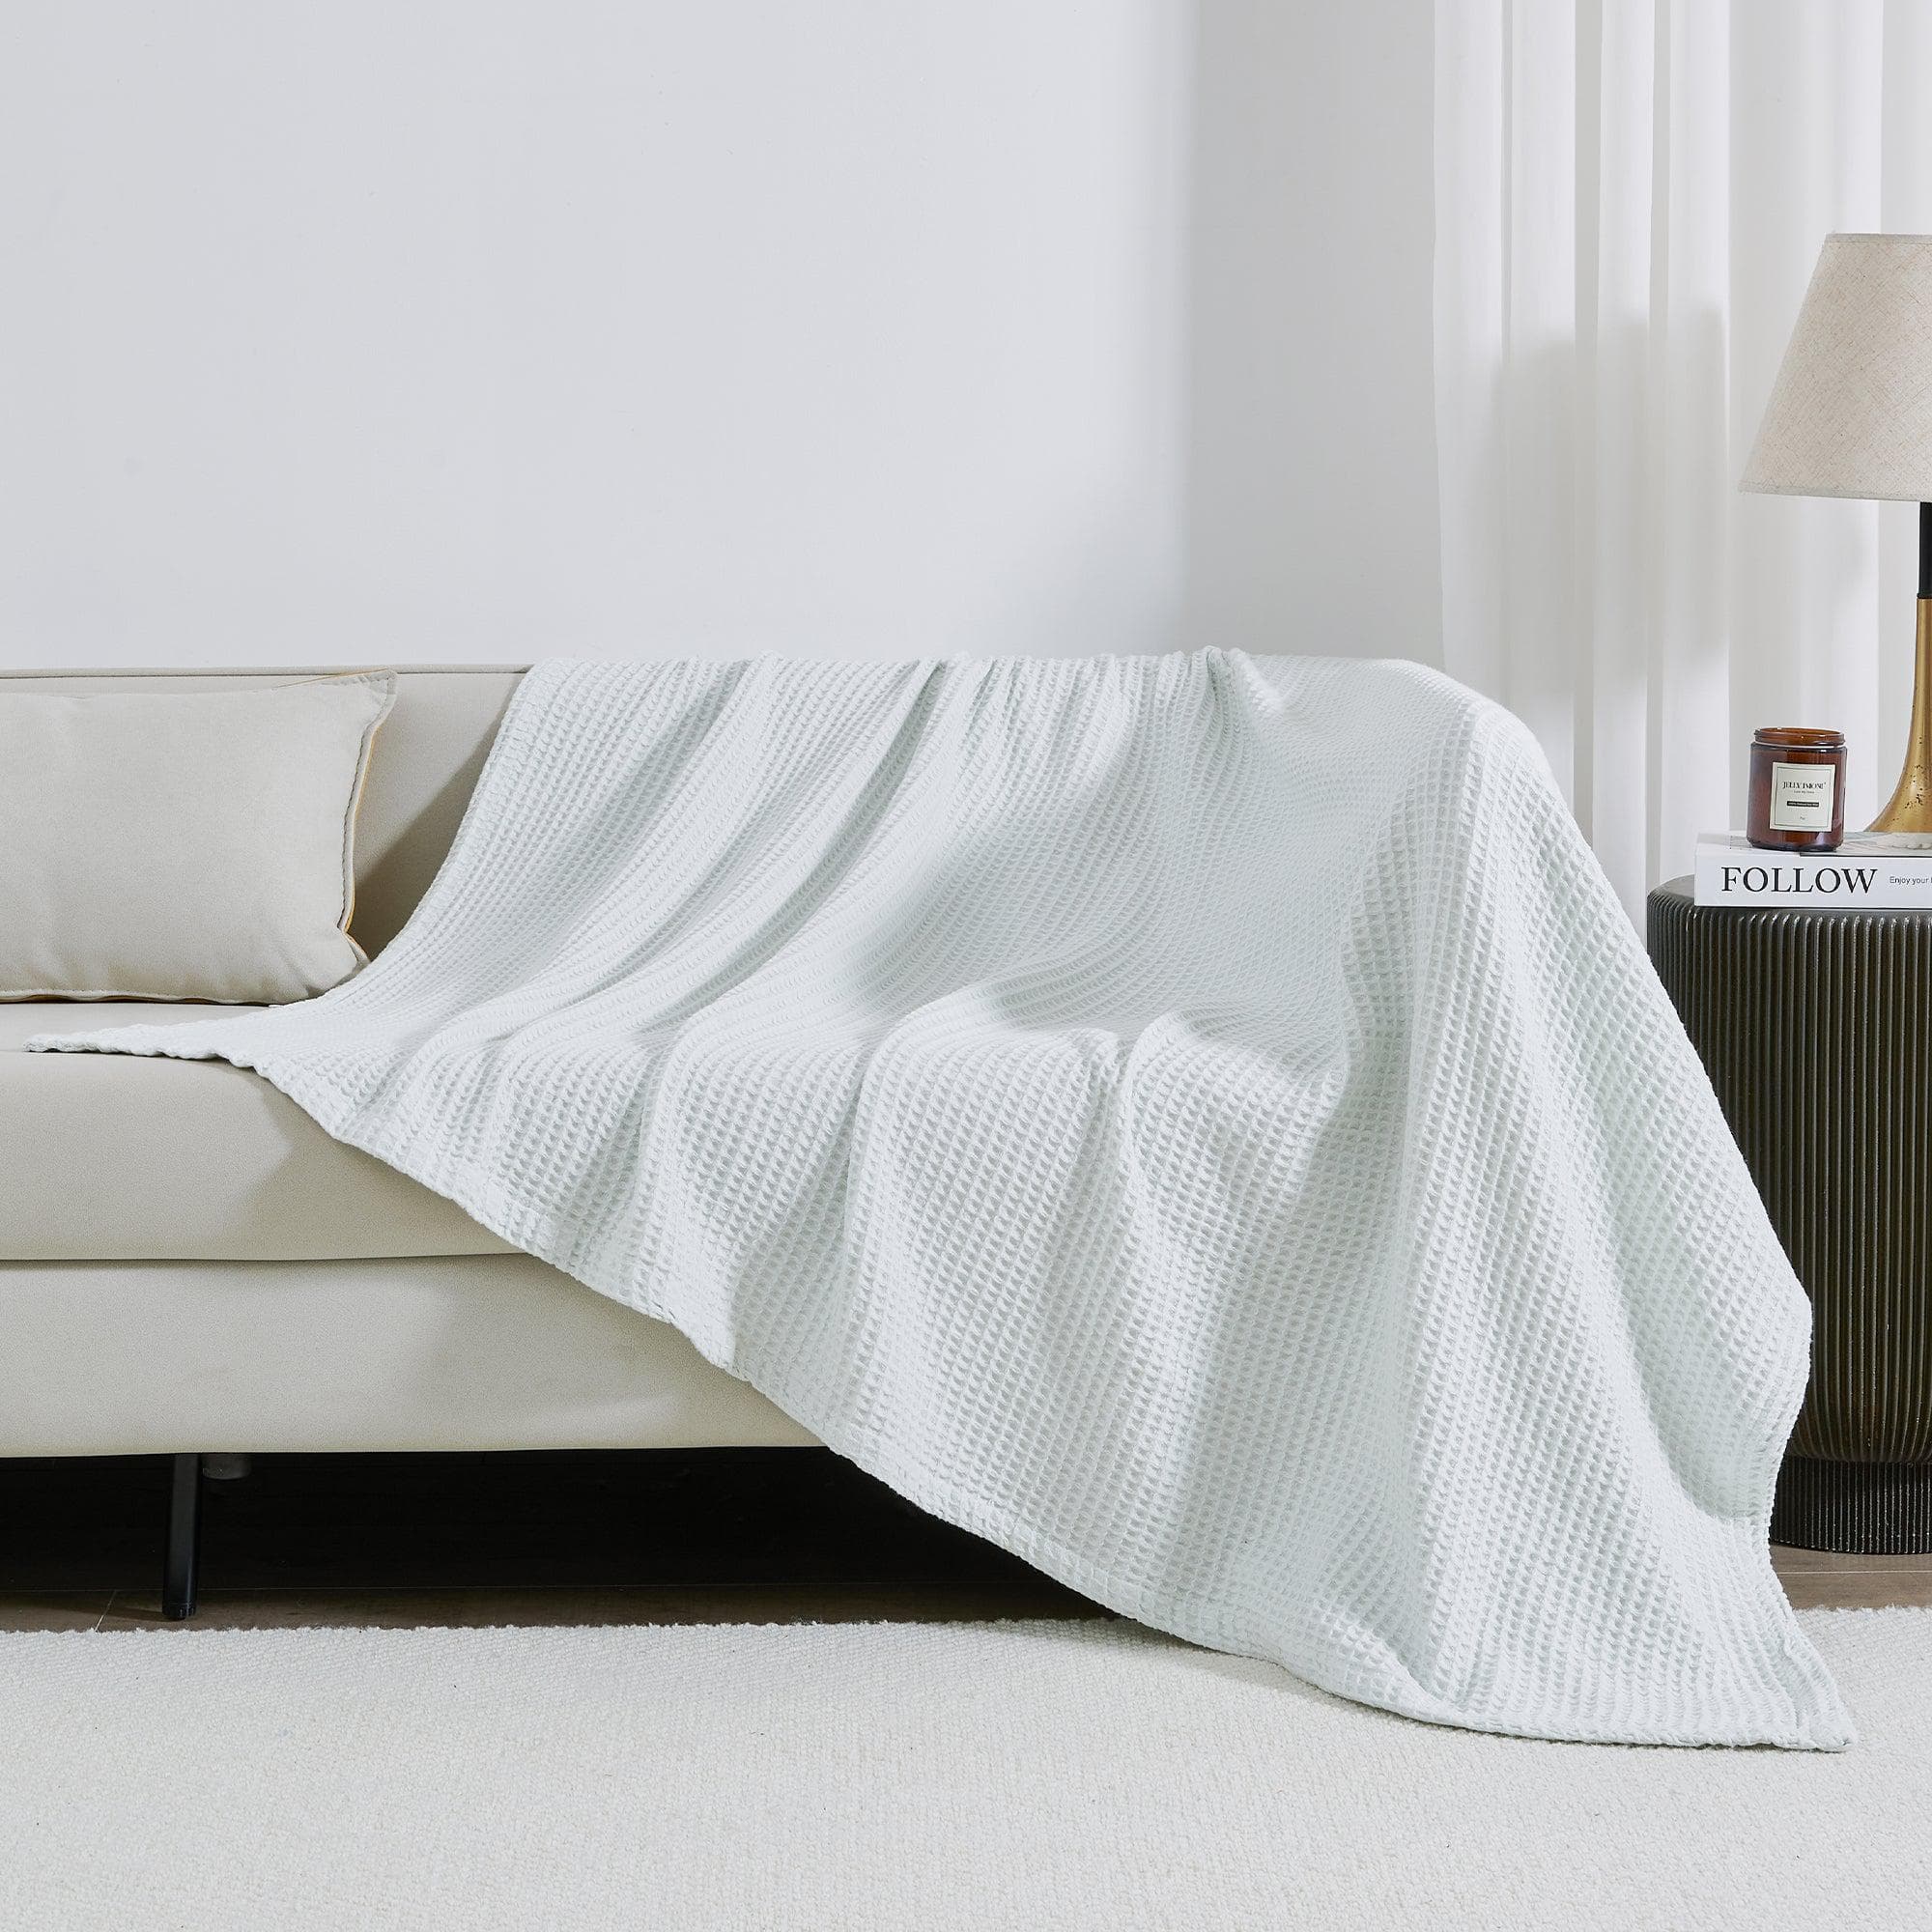 100% Cotton Waffle Weave Blanket | Mikala Collection by Great Bay Home